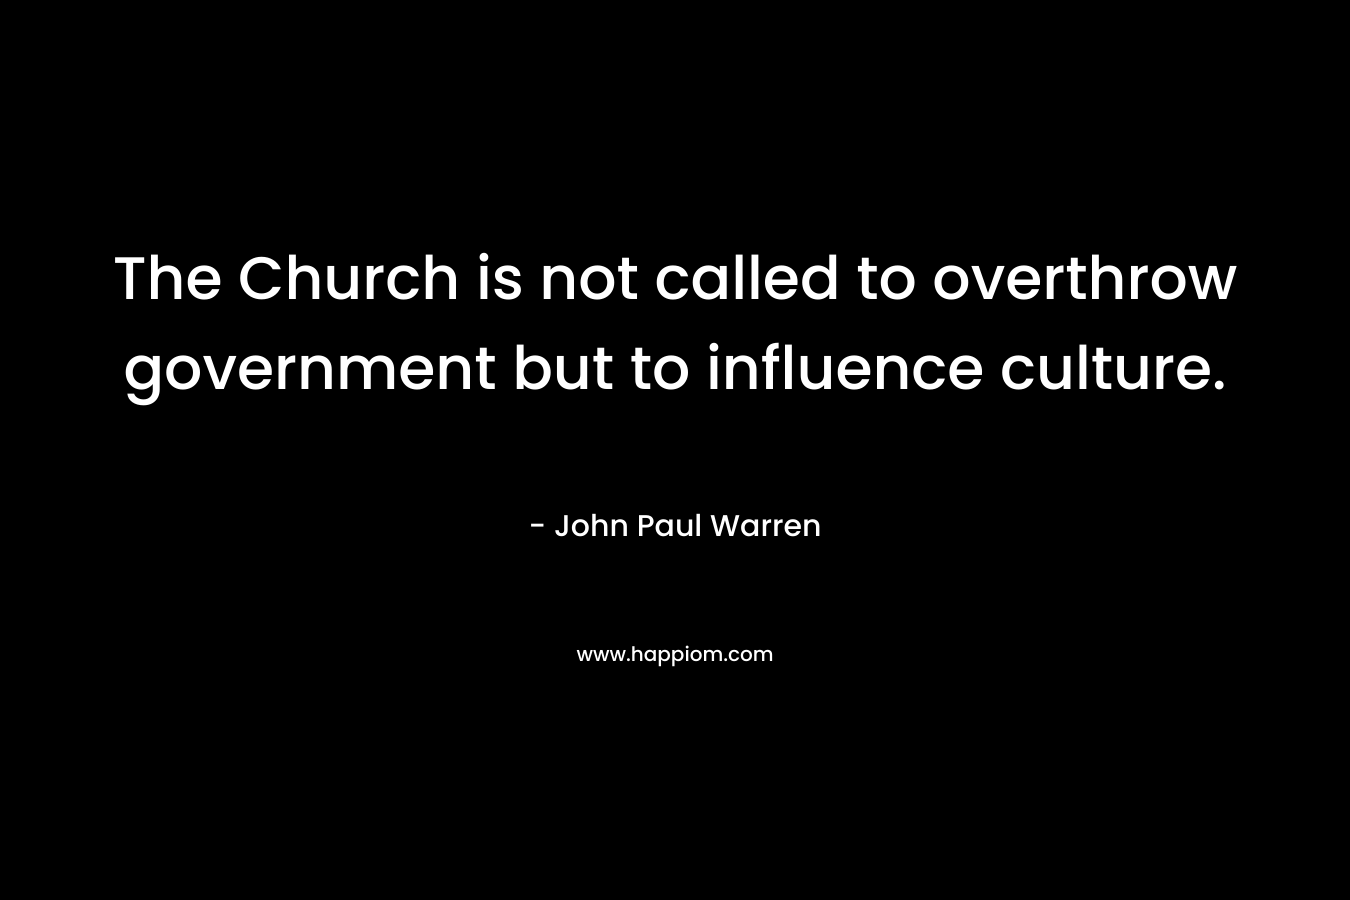 The Church is not called to overthrow government but to influence culture.